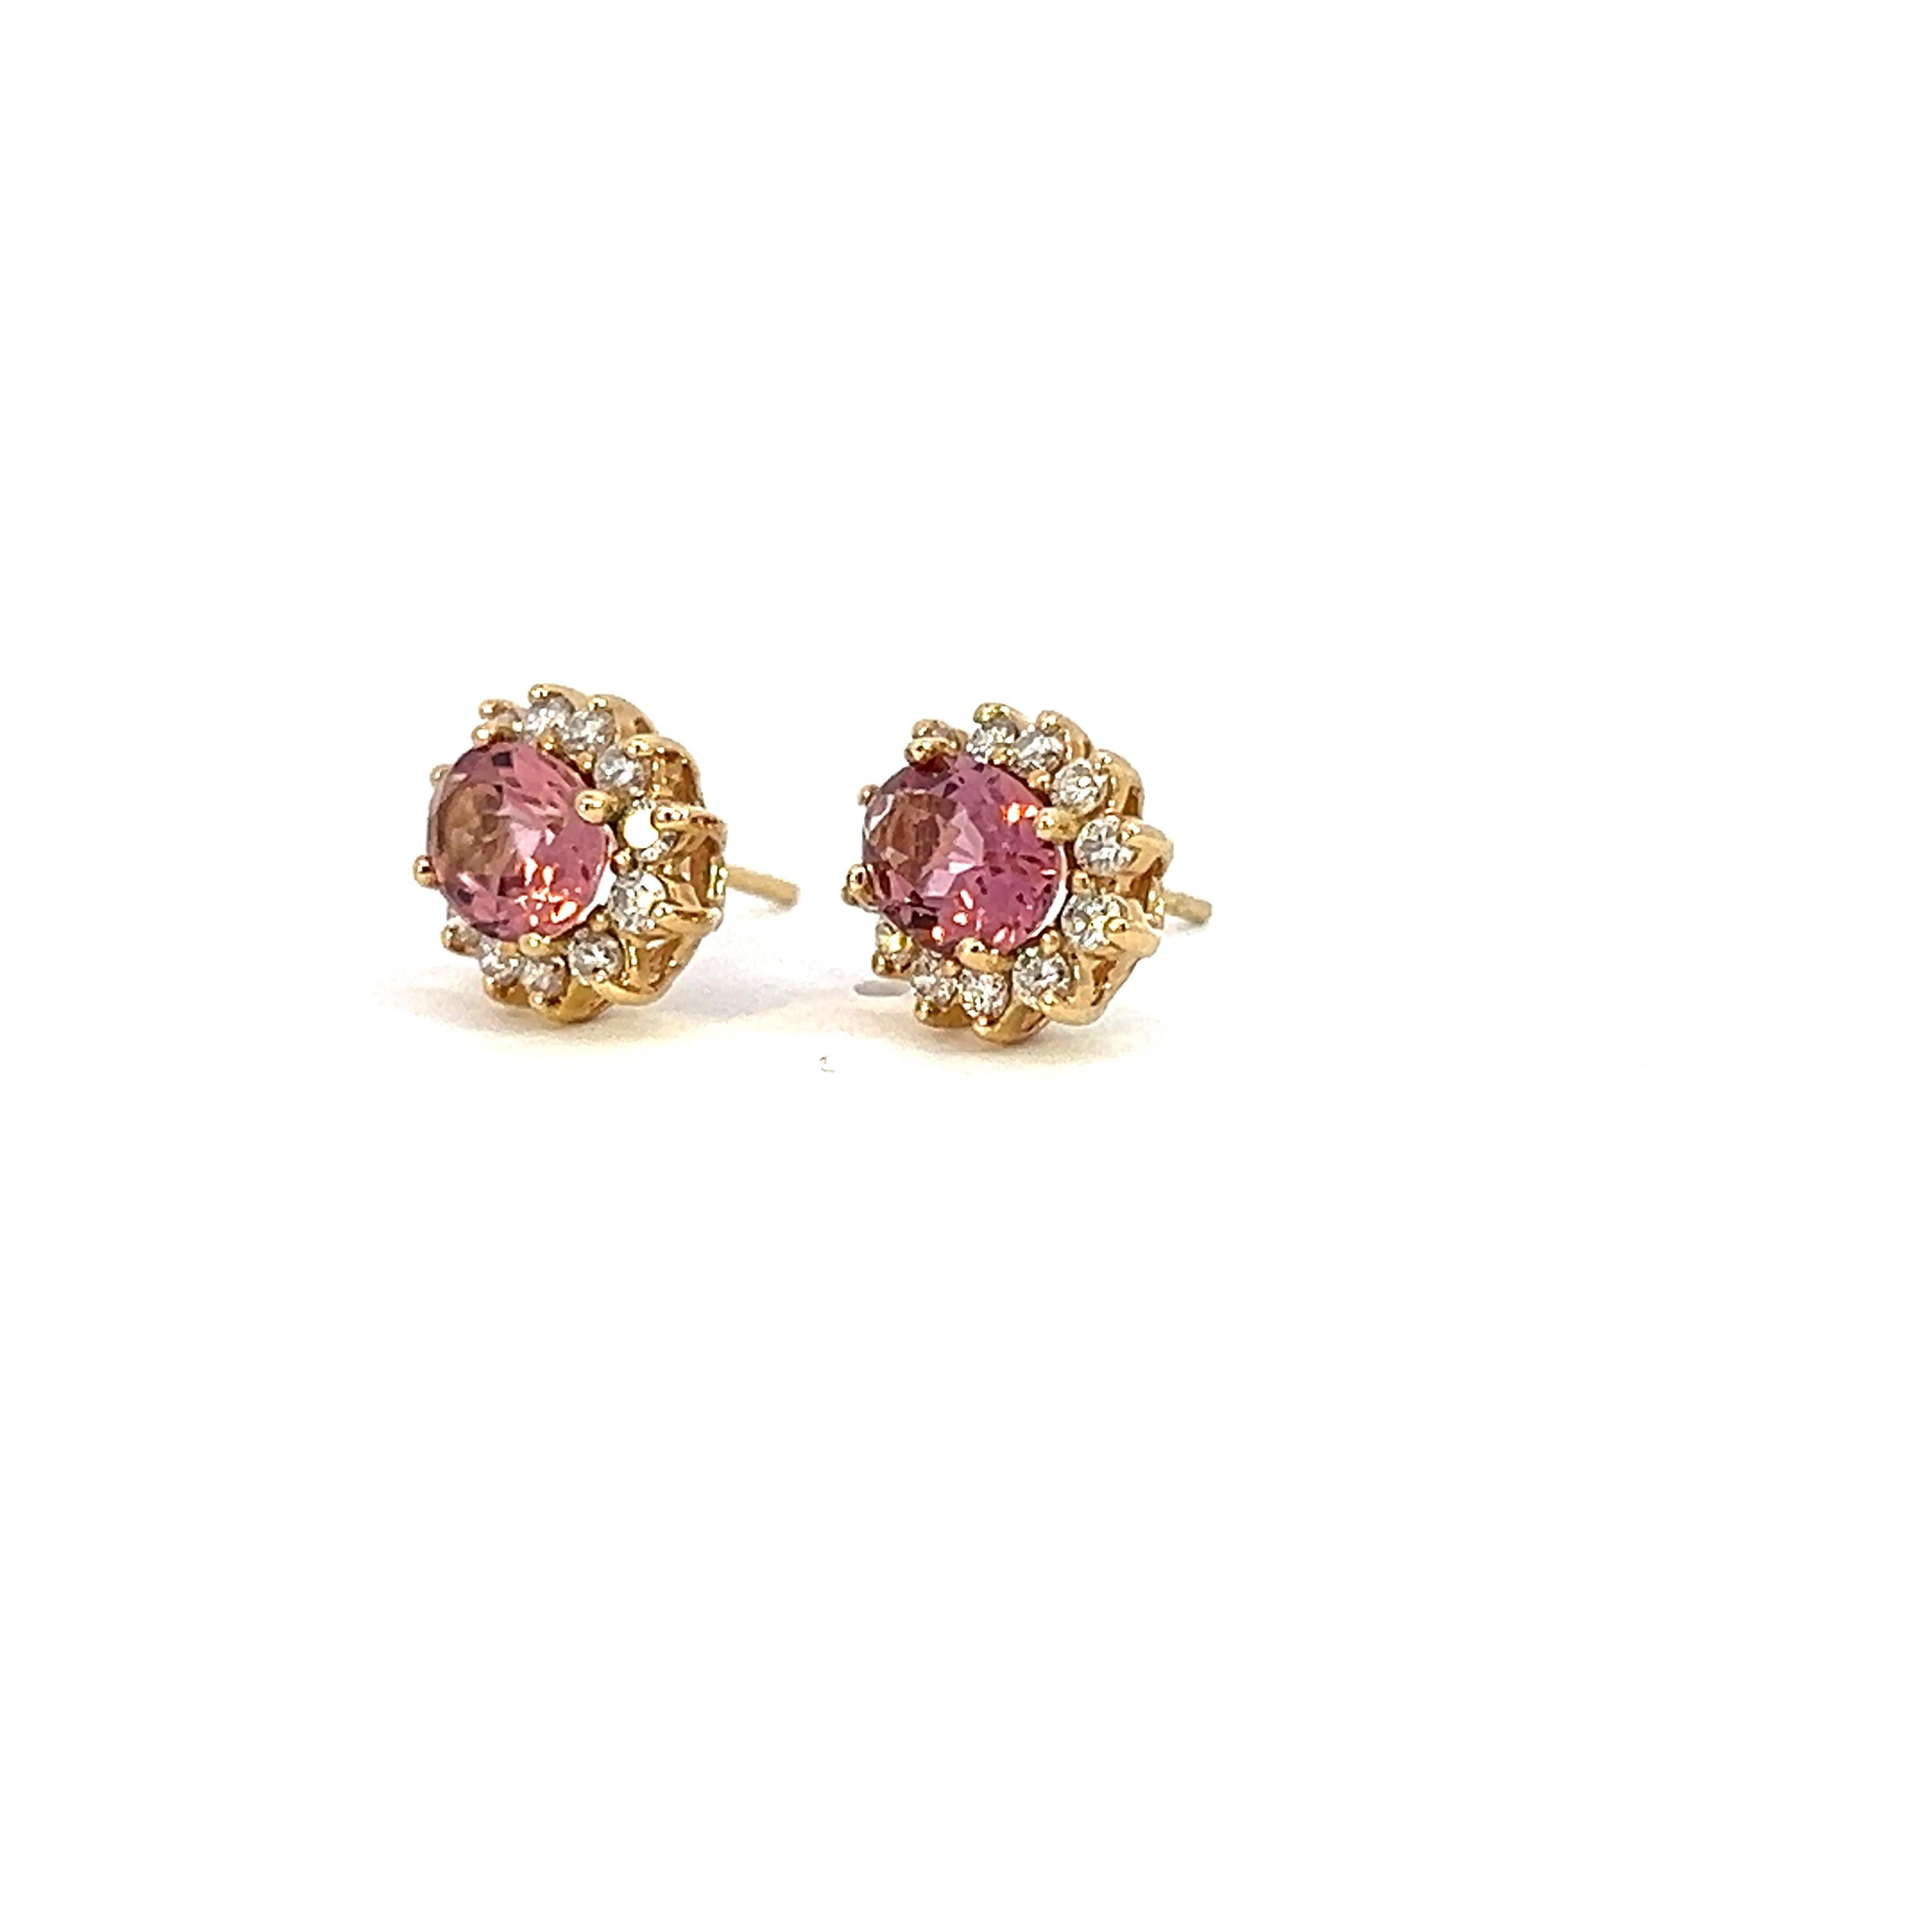 Natural Tourmaline Diamond Earrings 14k Yellow Gold 1.94 TCW Certified In New Condition For Sale In Brooklyn, NY